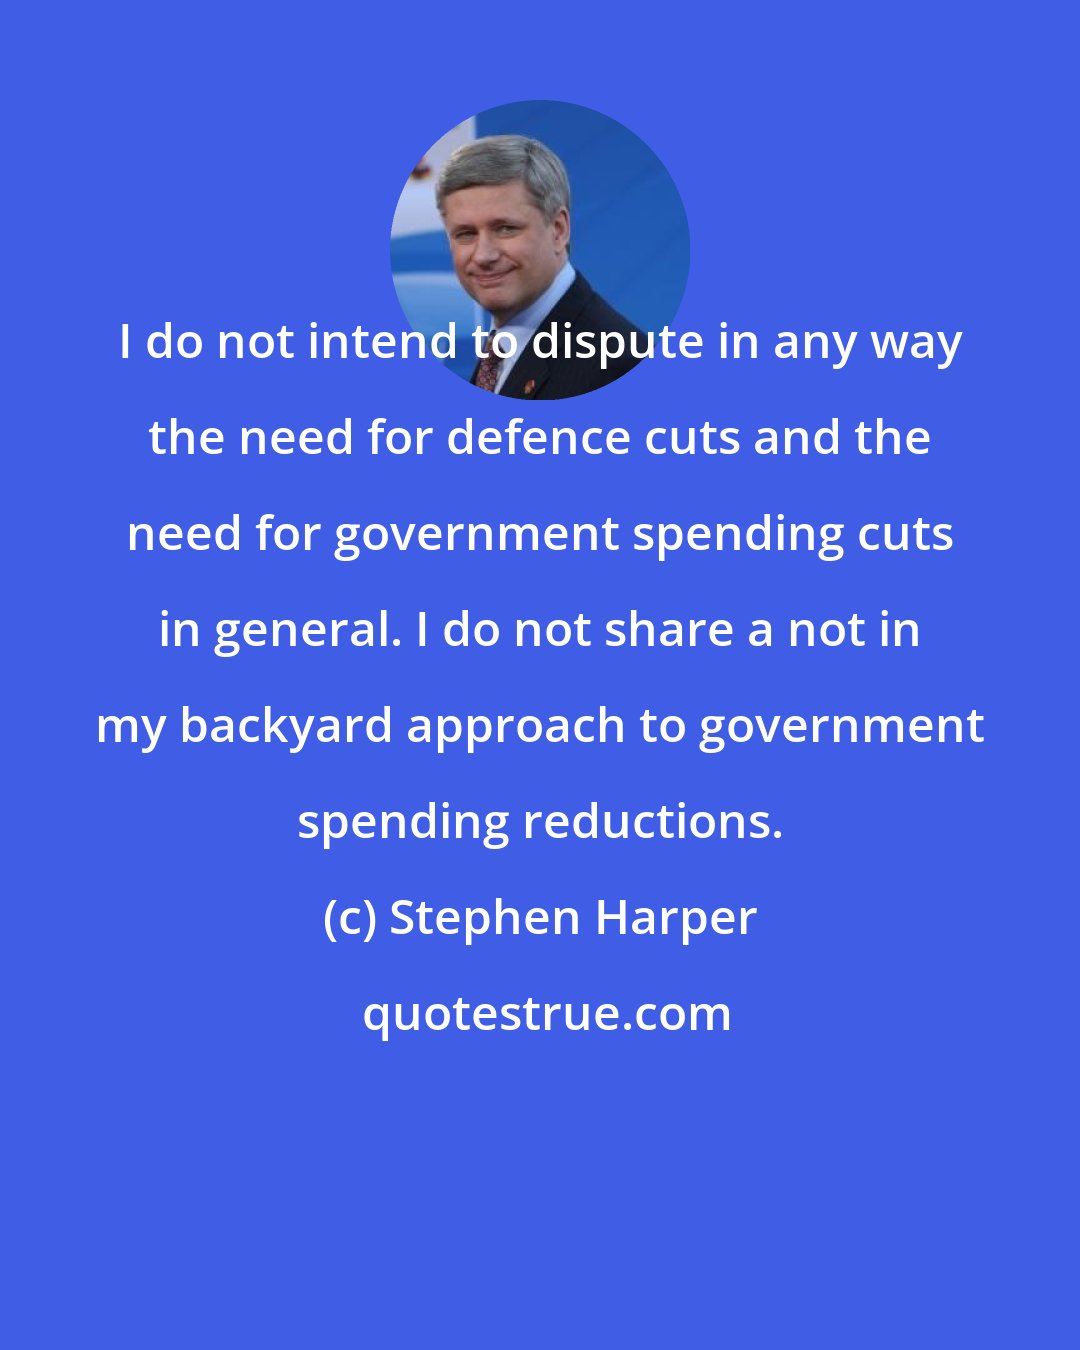 Stephen Harper: I do not intend to dispute in any way the need for defence cuts and the need for government spending cuts in general. I do not share a not in my backyard approach to government spending reductions.